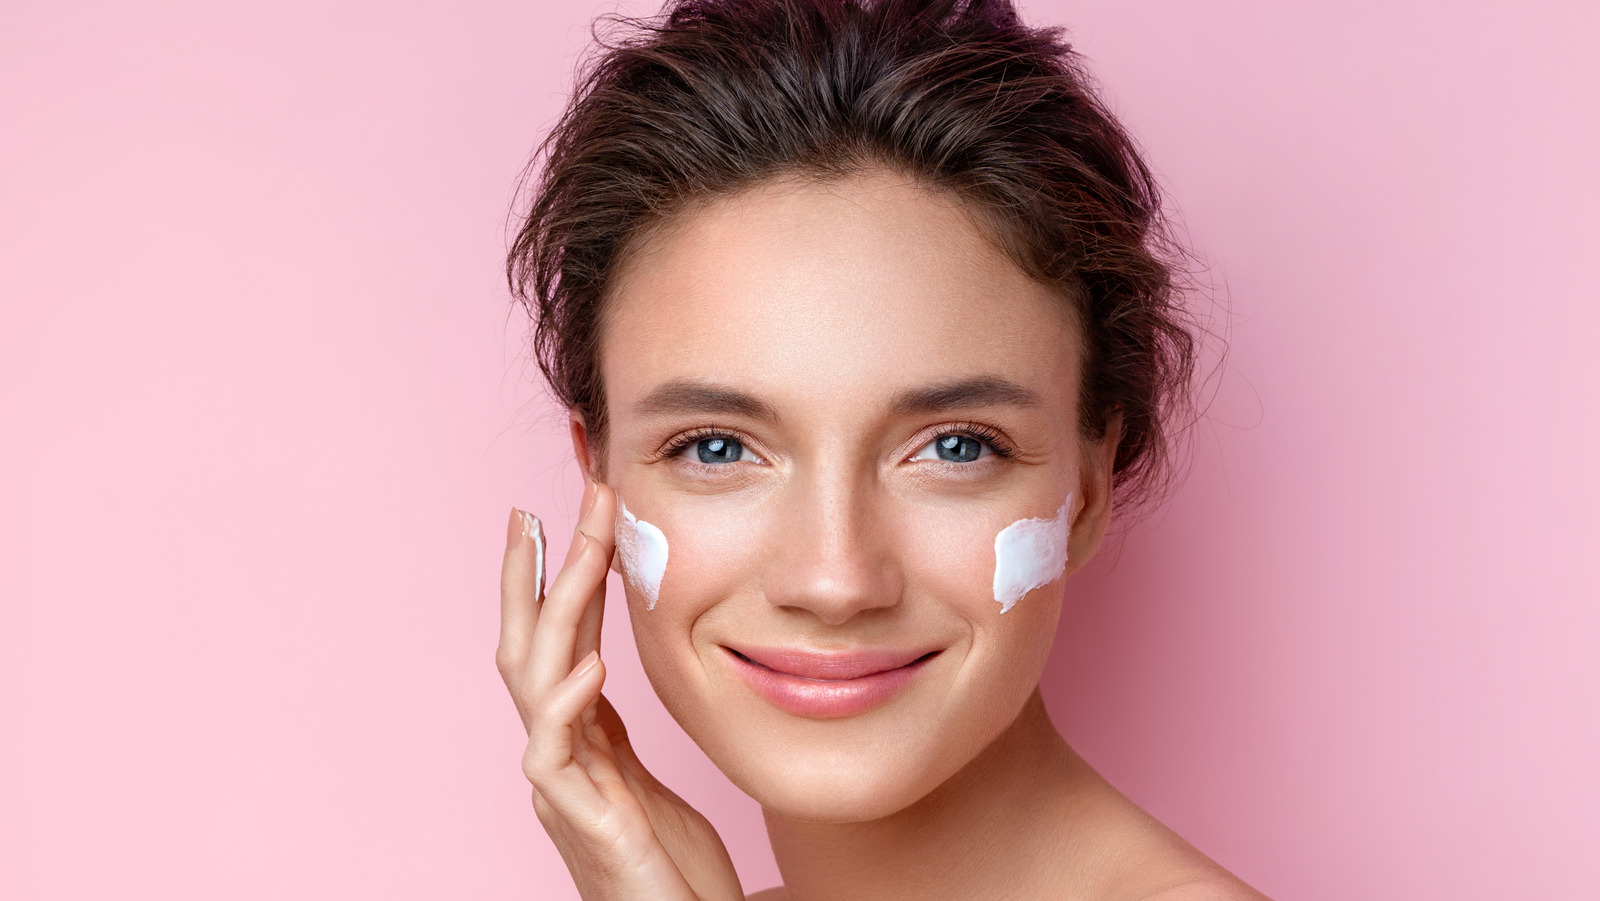 Why You Should Think Twice Before Using Scented Moisturizer On Your Face